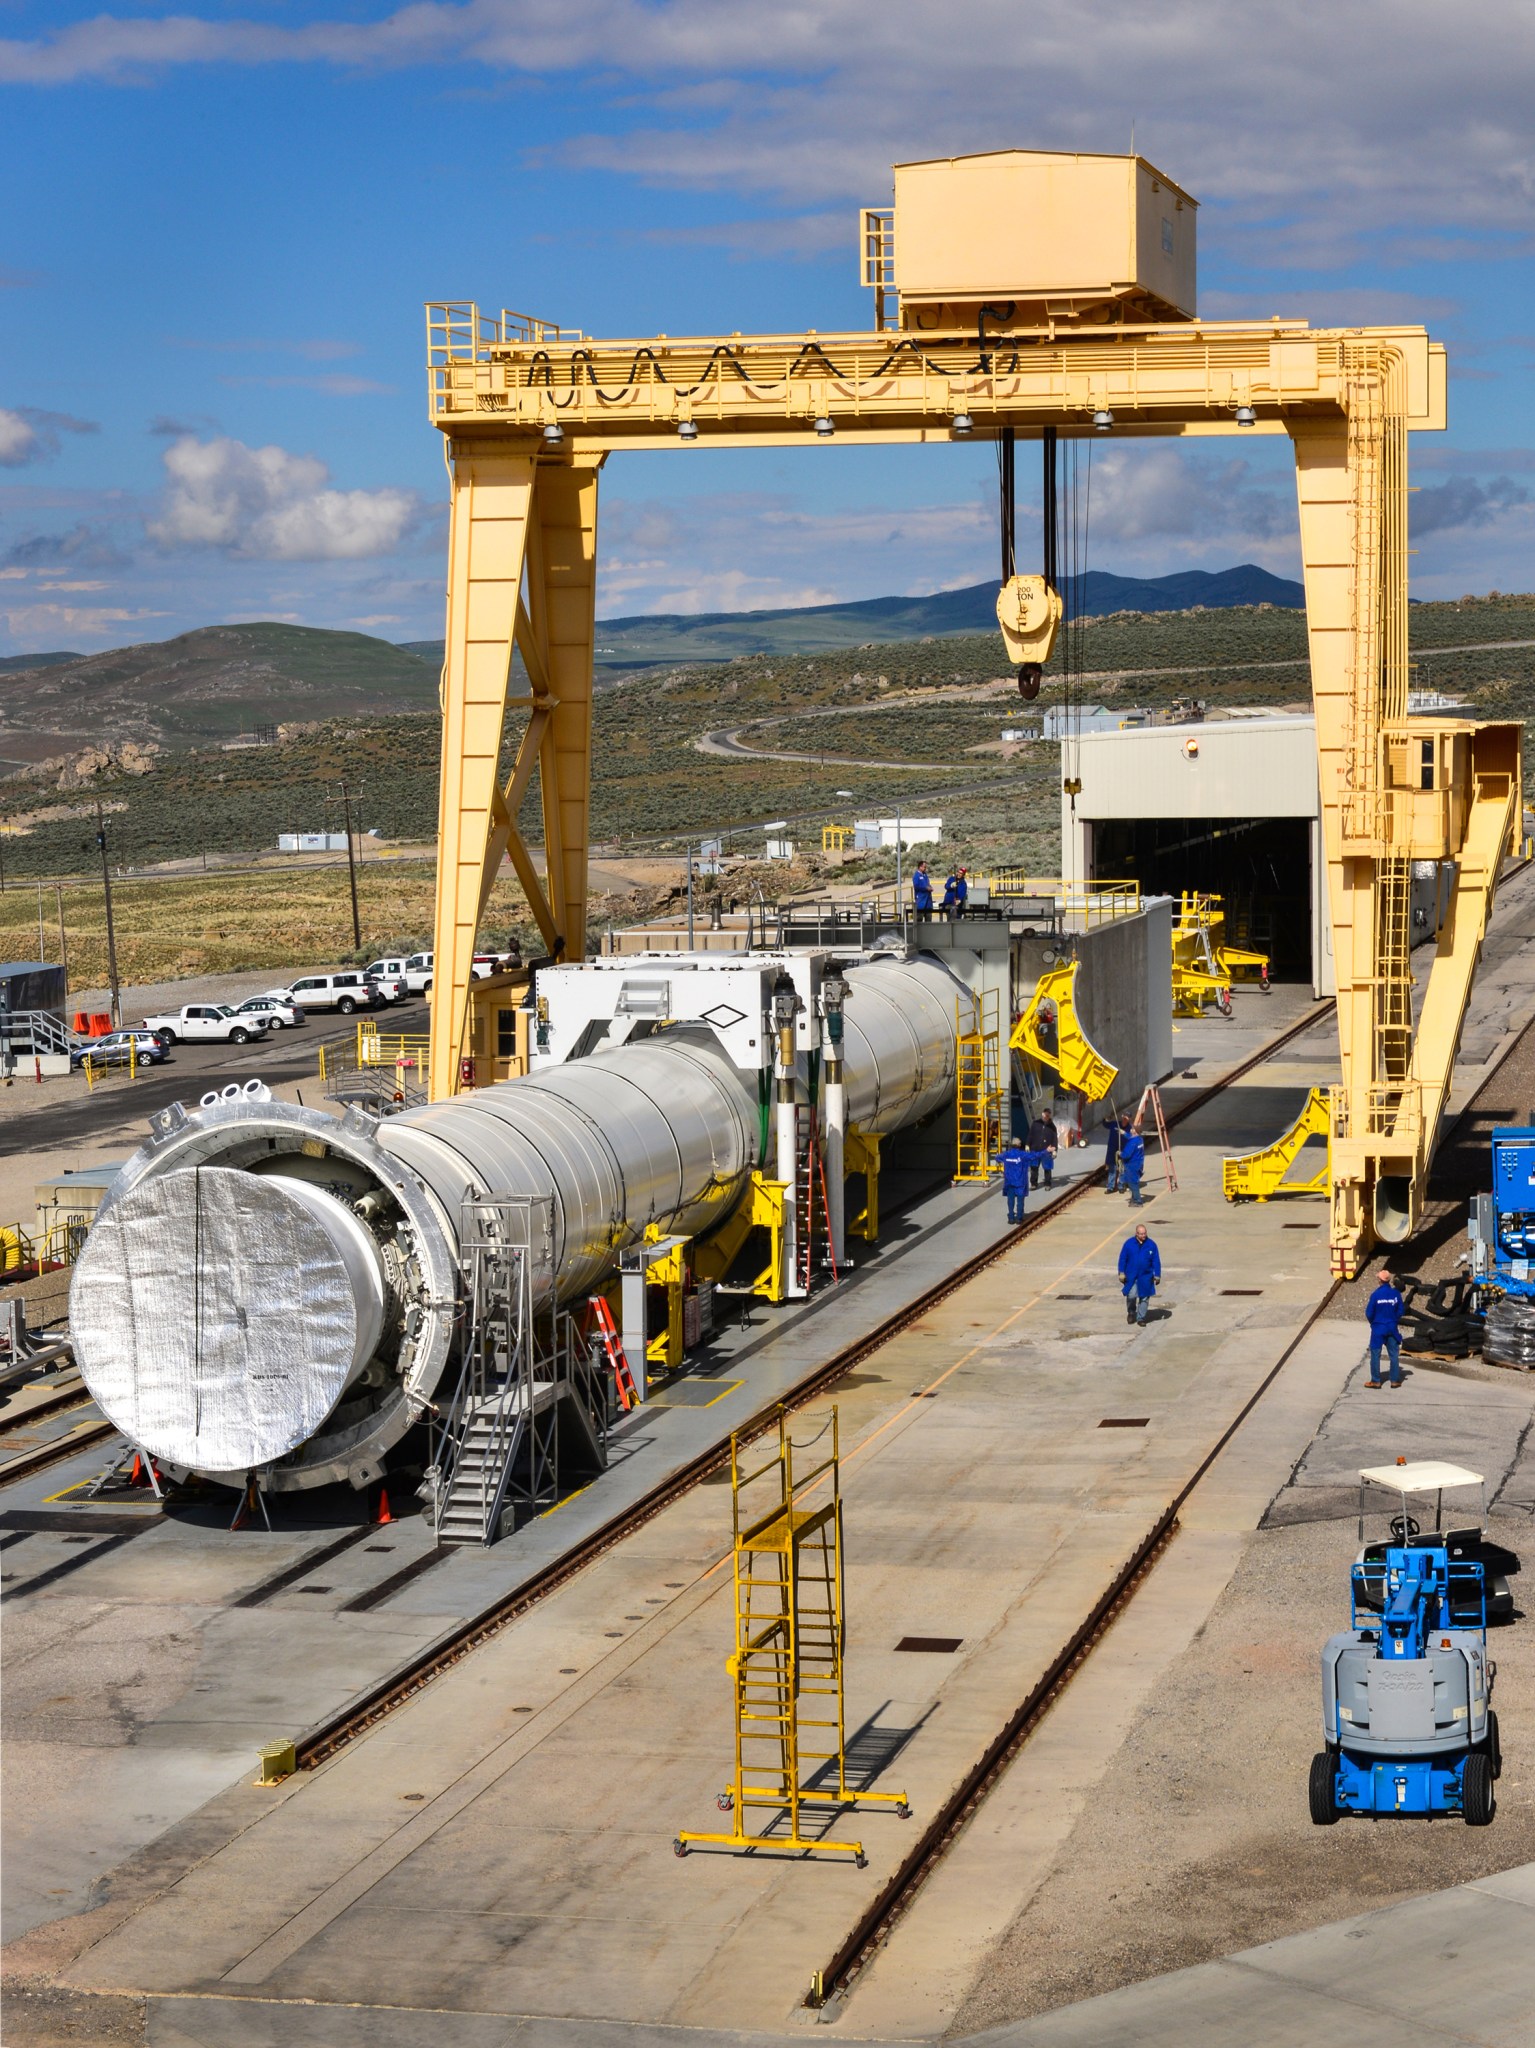 Test version of the booster for NASA's Space Launch System